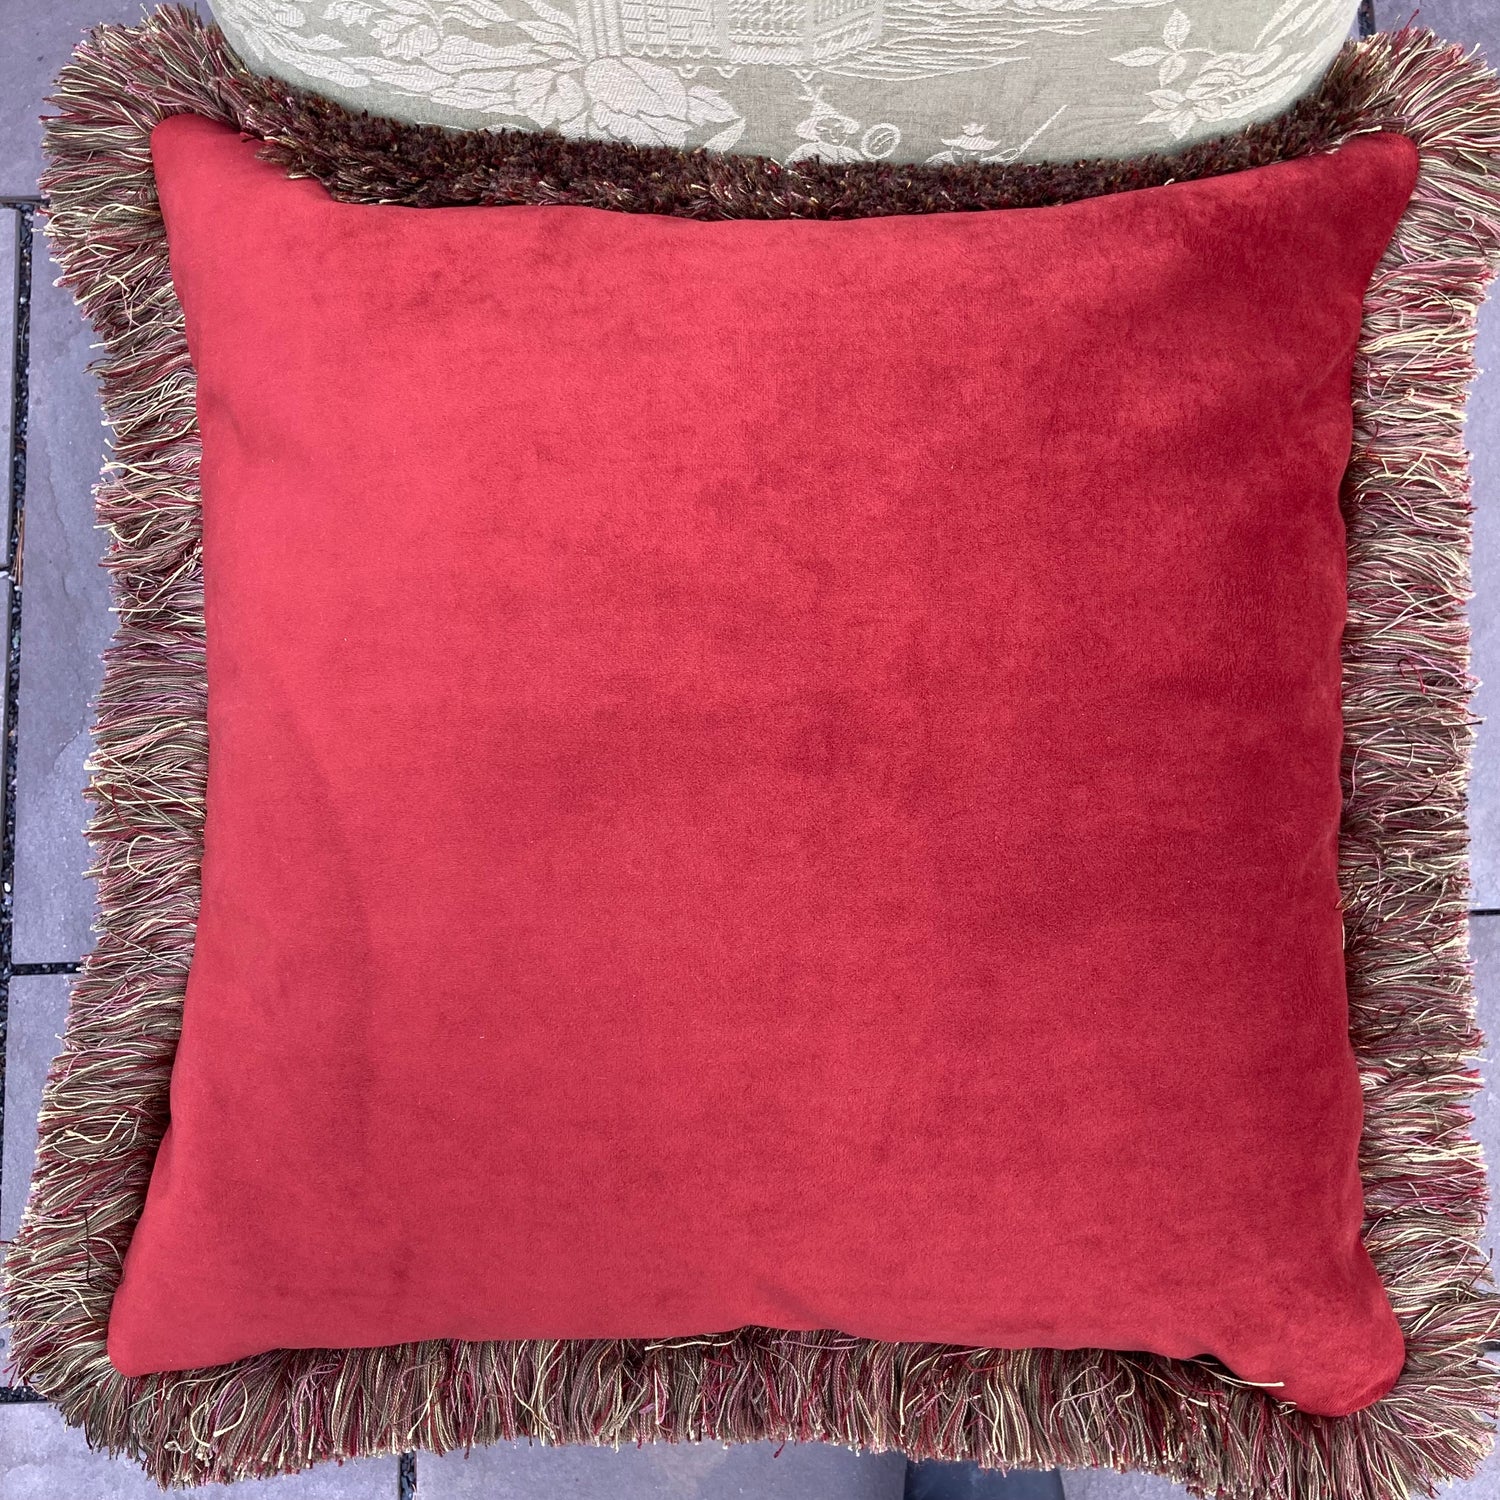 Traditional Crimson Velvet Paisley 21 x 21 Square Inches Decorative Pillow Back with Down Feather Insert